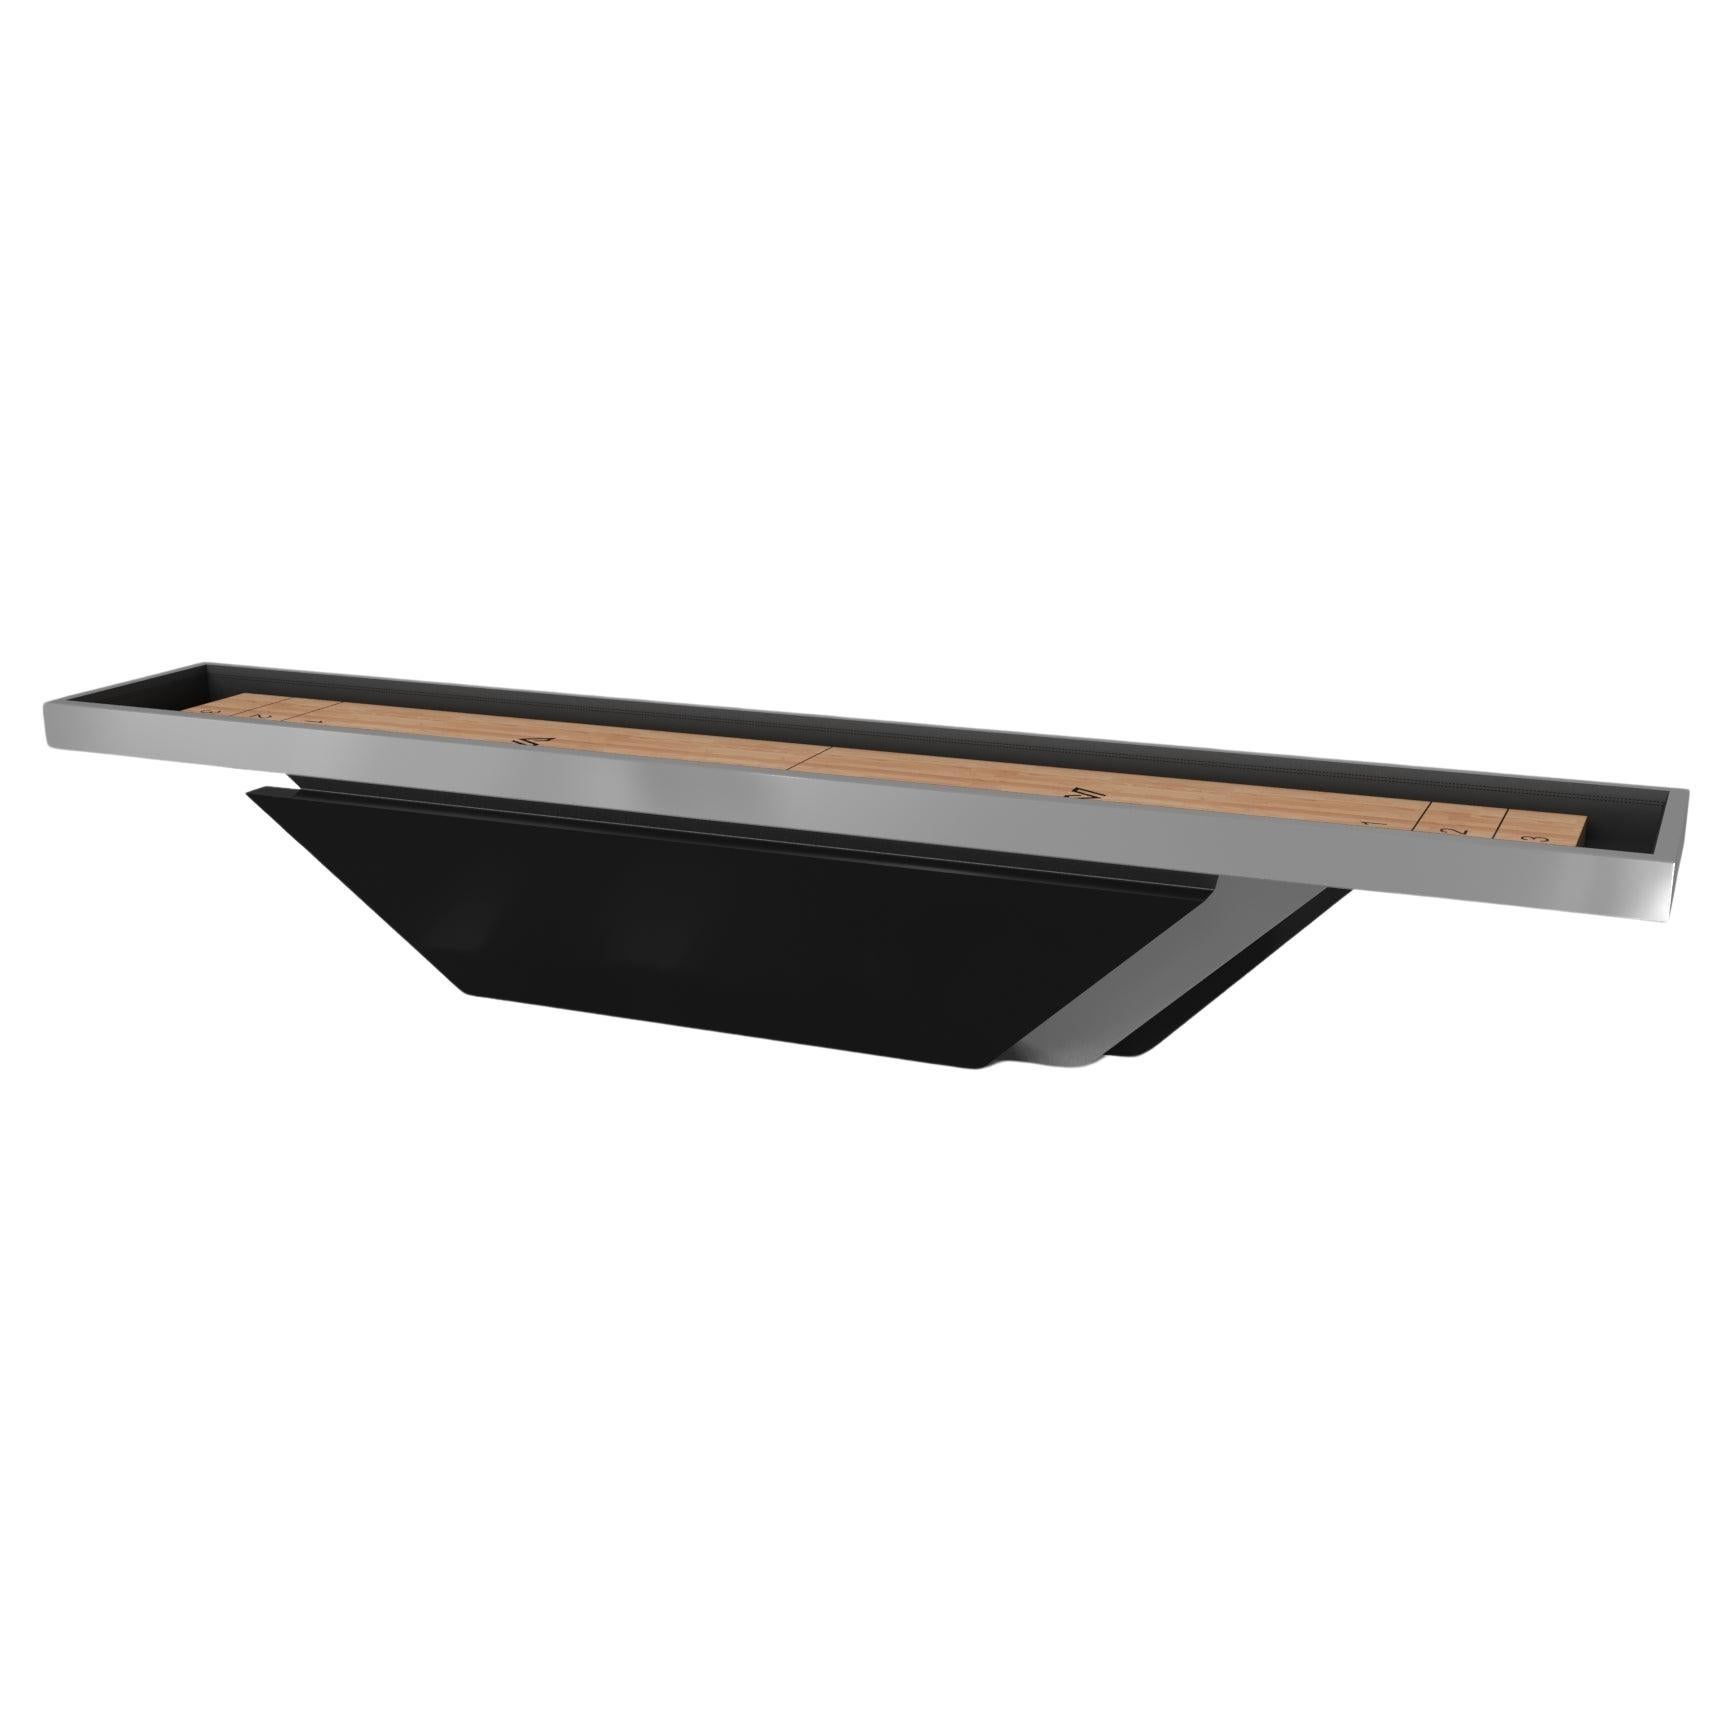 Elevate Customs Vogue Shuffleboard Tables /Stainless Steel Sheet Metal in 9'-USA